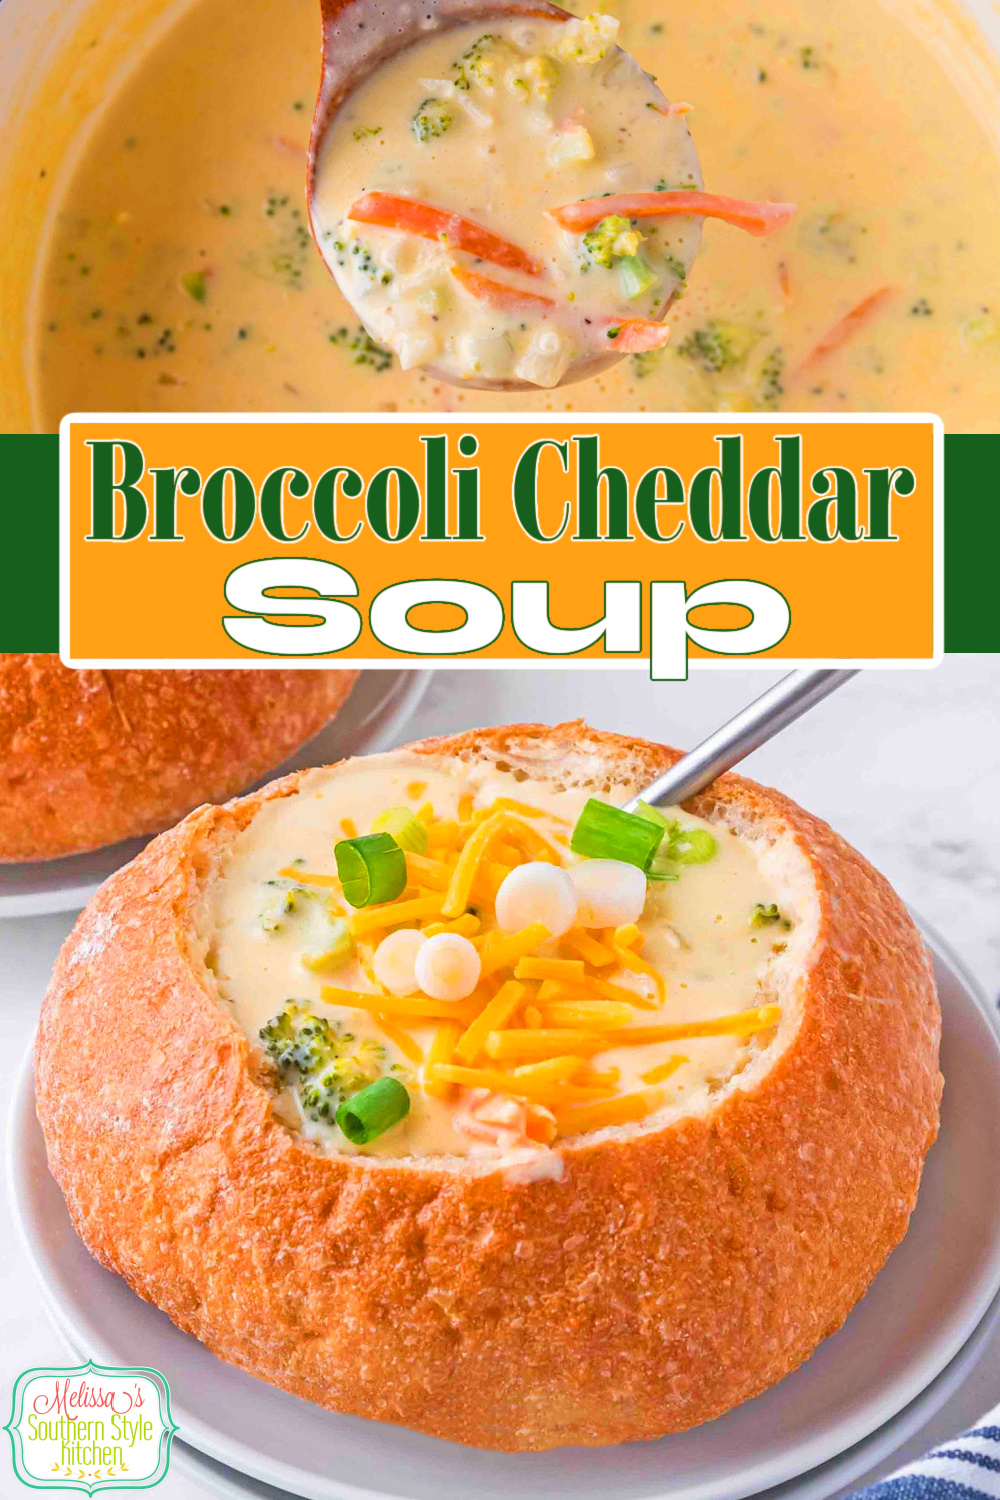 This Copycat Broccoli Cheddar Soup features fresh broccoli florets, carrots and onions and a perfectly seasoned cheddar cheese broth #broccolicheesesoup #copycatbroccolicheddarsoup #panerabroccolicheddarsoup #broccolicheese #broccolicheeserecipes #souprecipes via @melissasssk